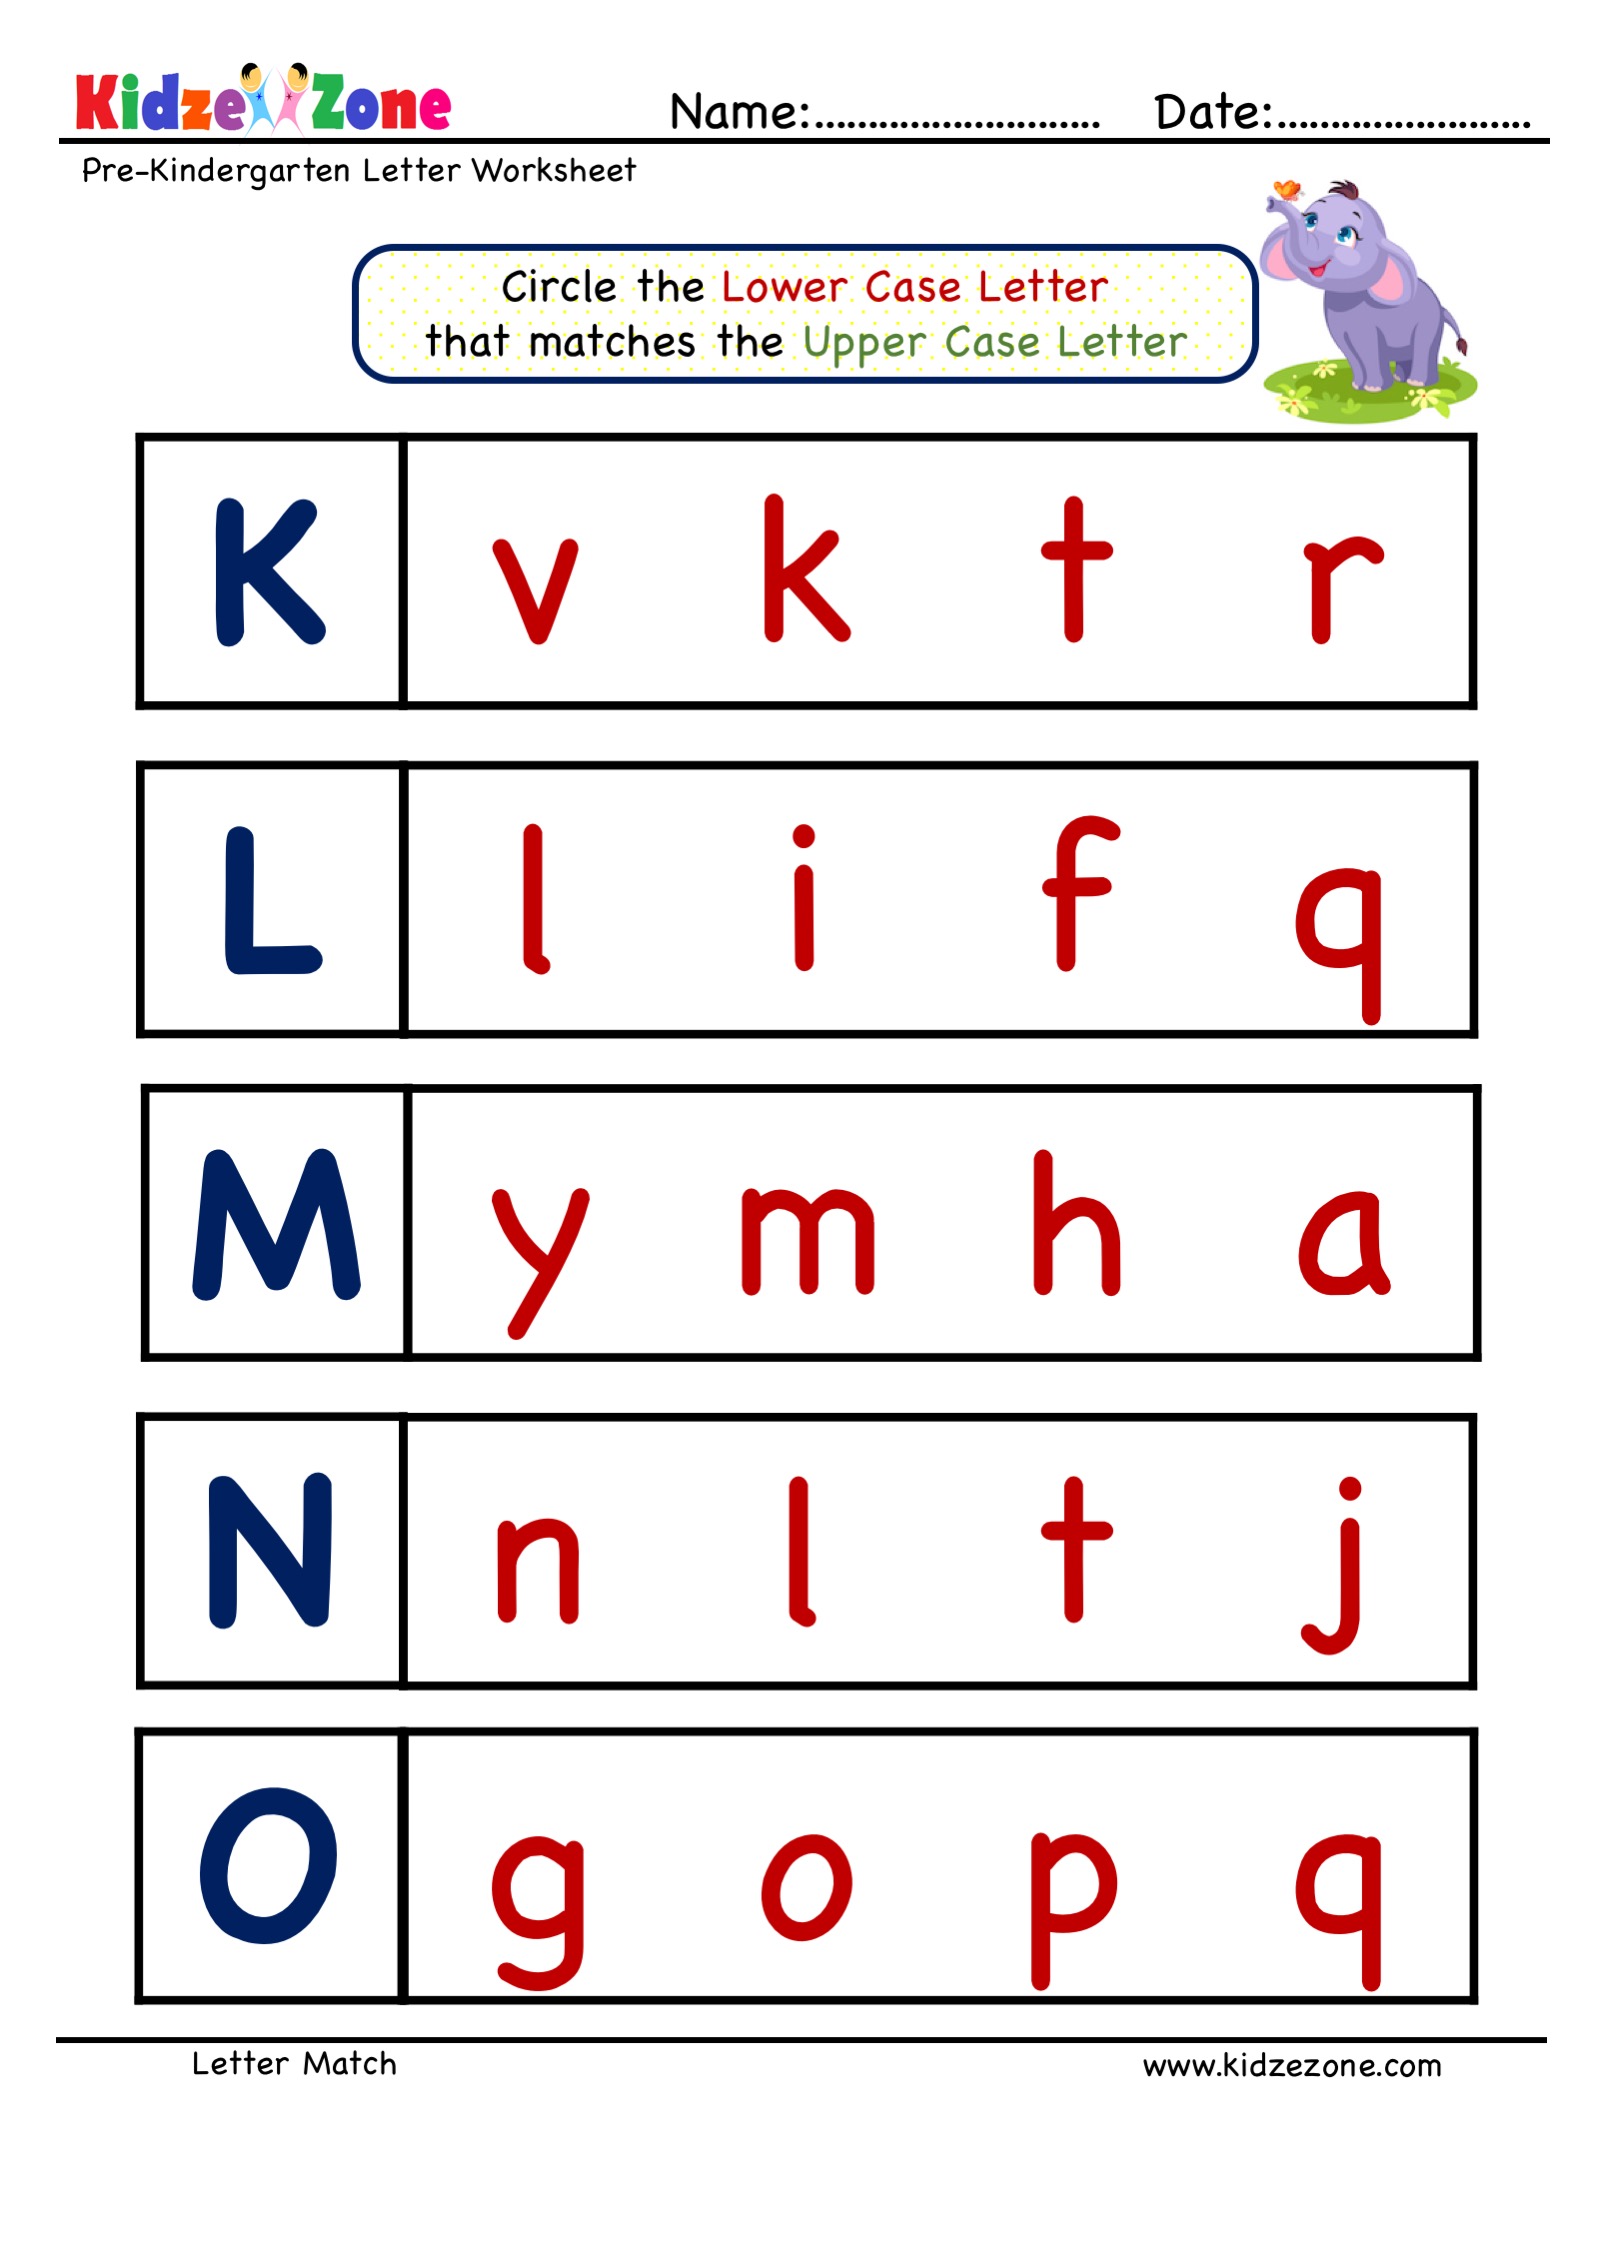 match-uppercase-and-lowercase-letters-worksheets